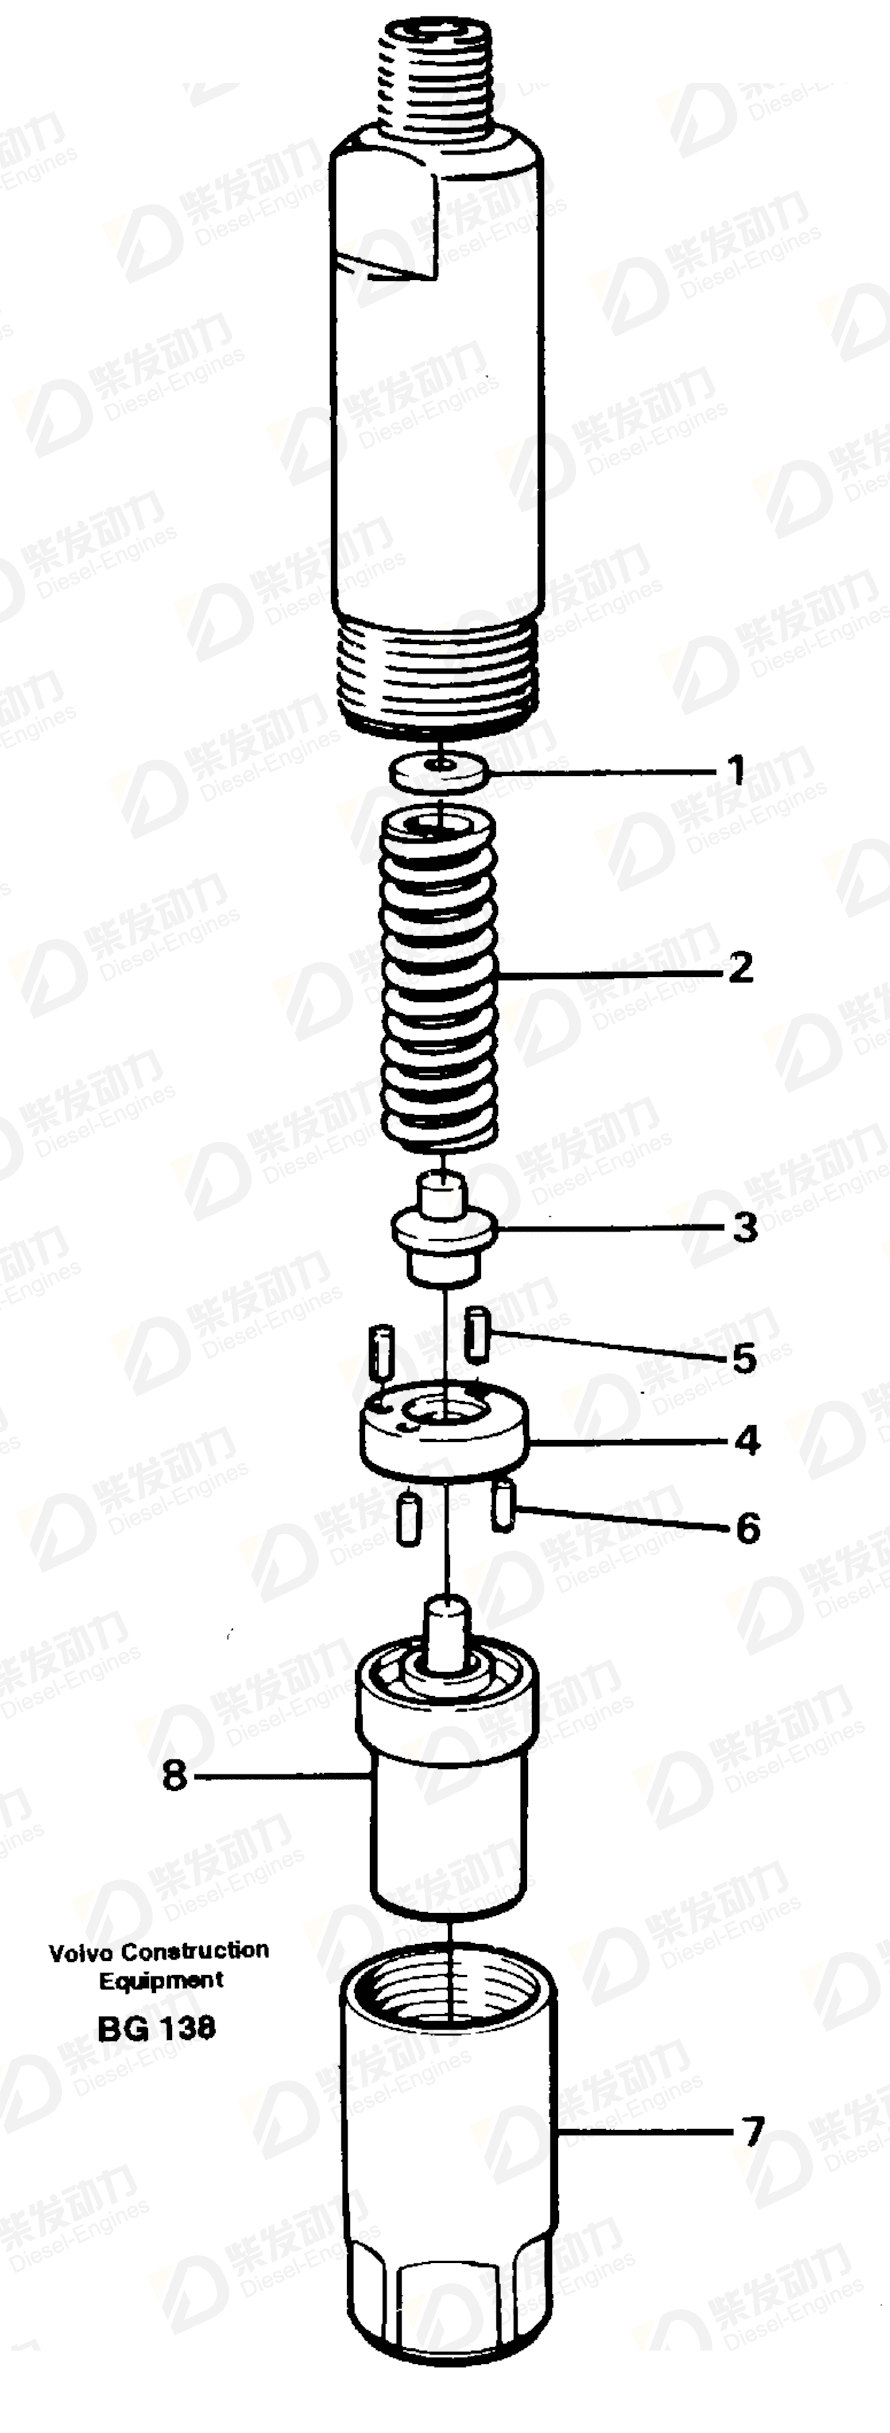 VOLVO Injector 478606 Drawing